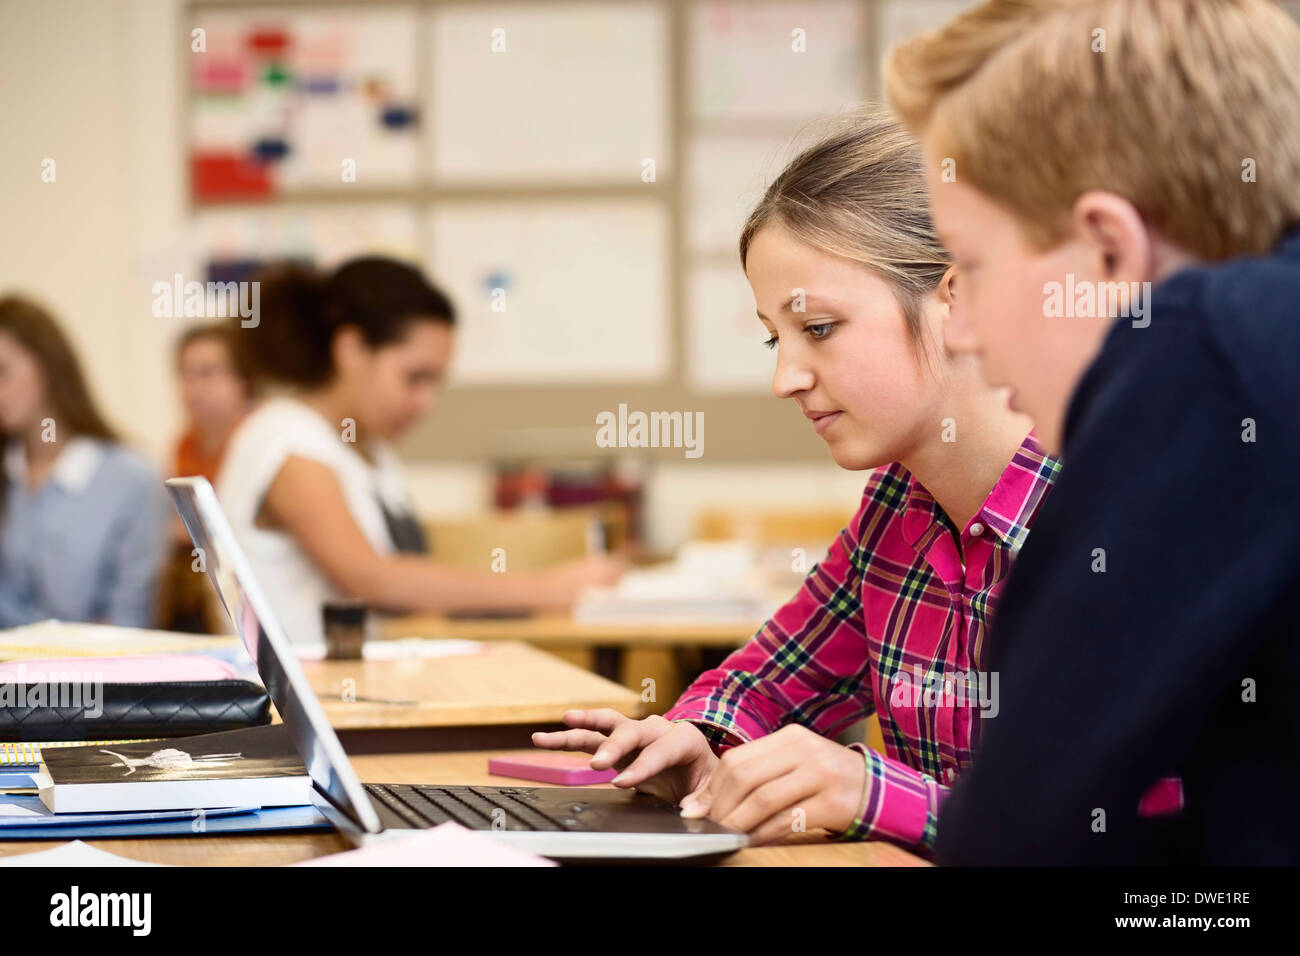 High school students using laptop in classroom Stock Photo